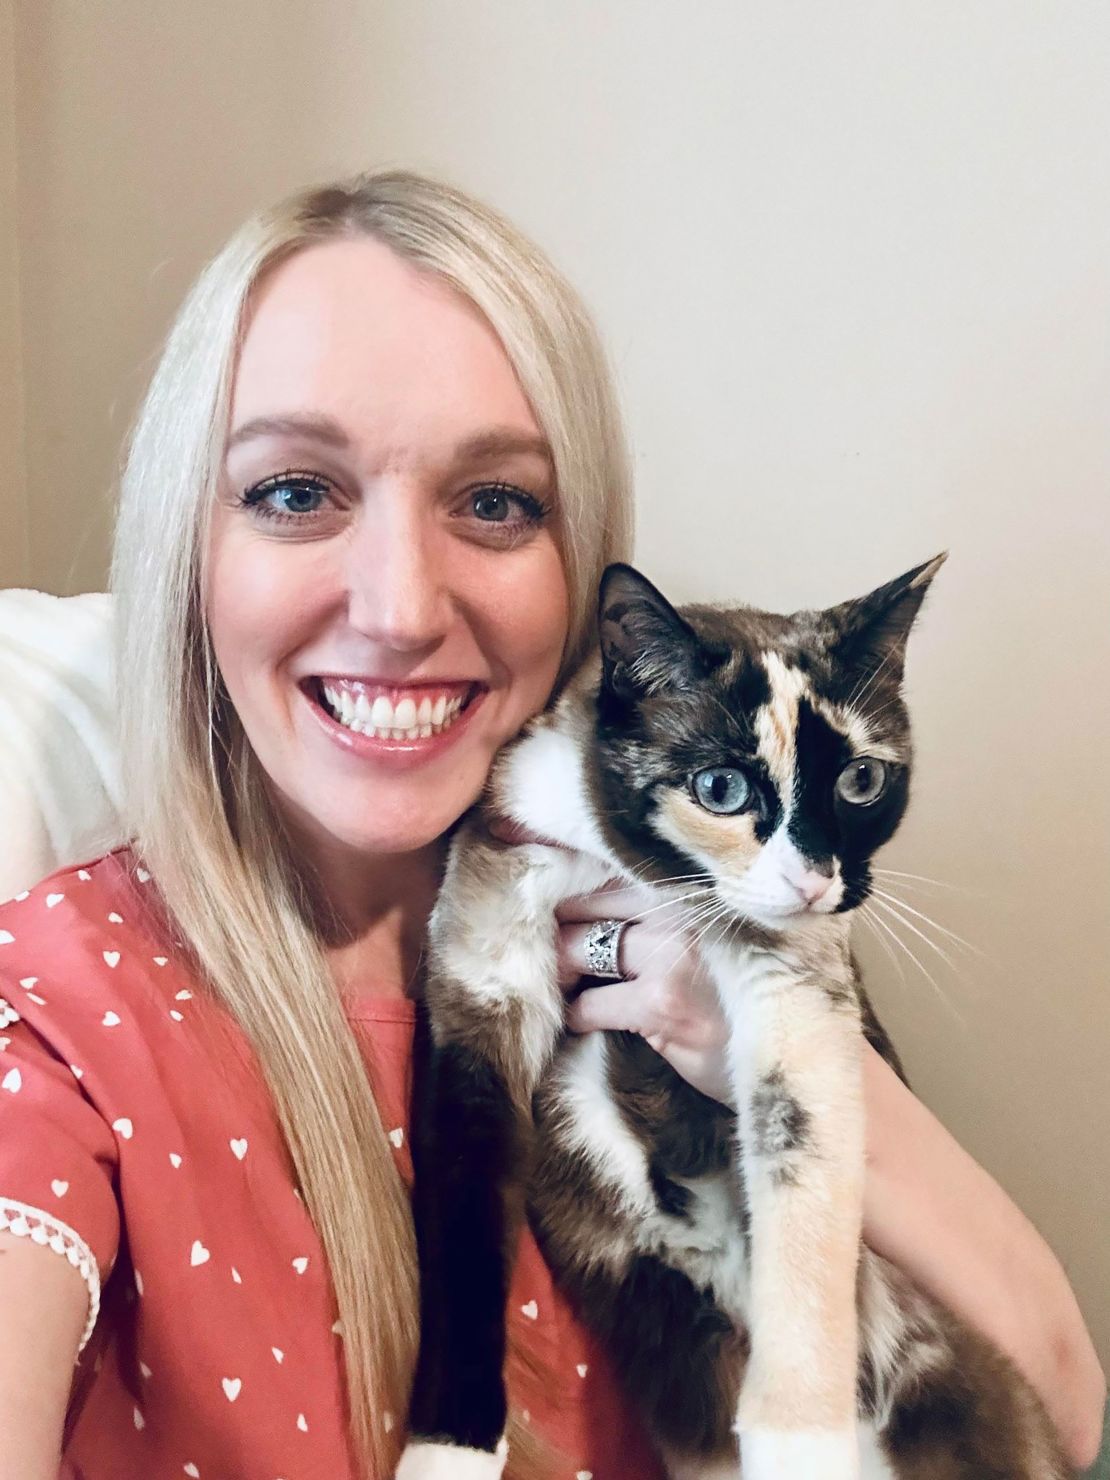 Clark says her cat is her "emotional support."